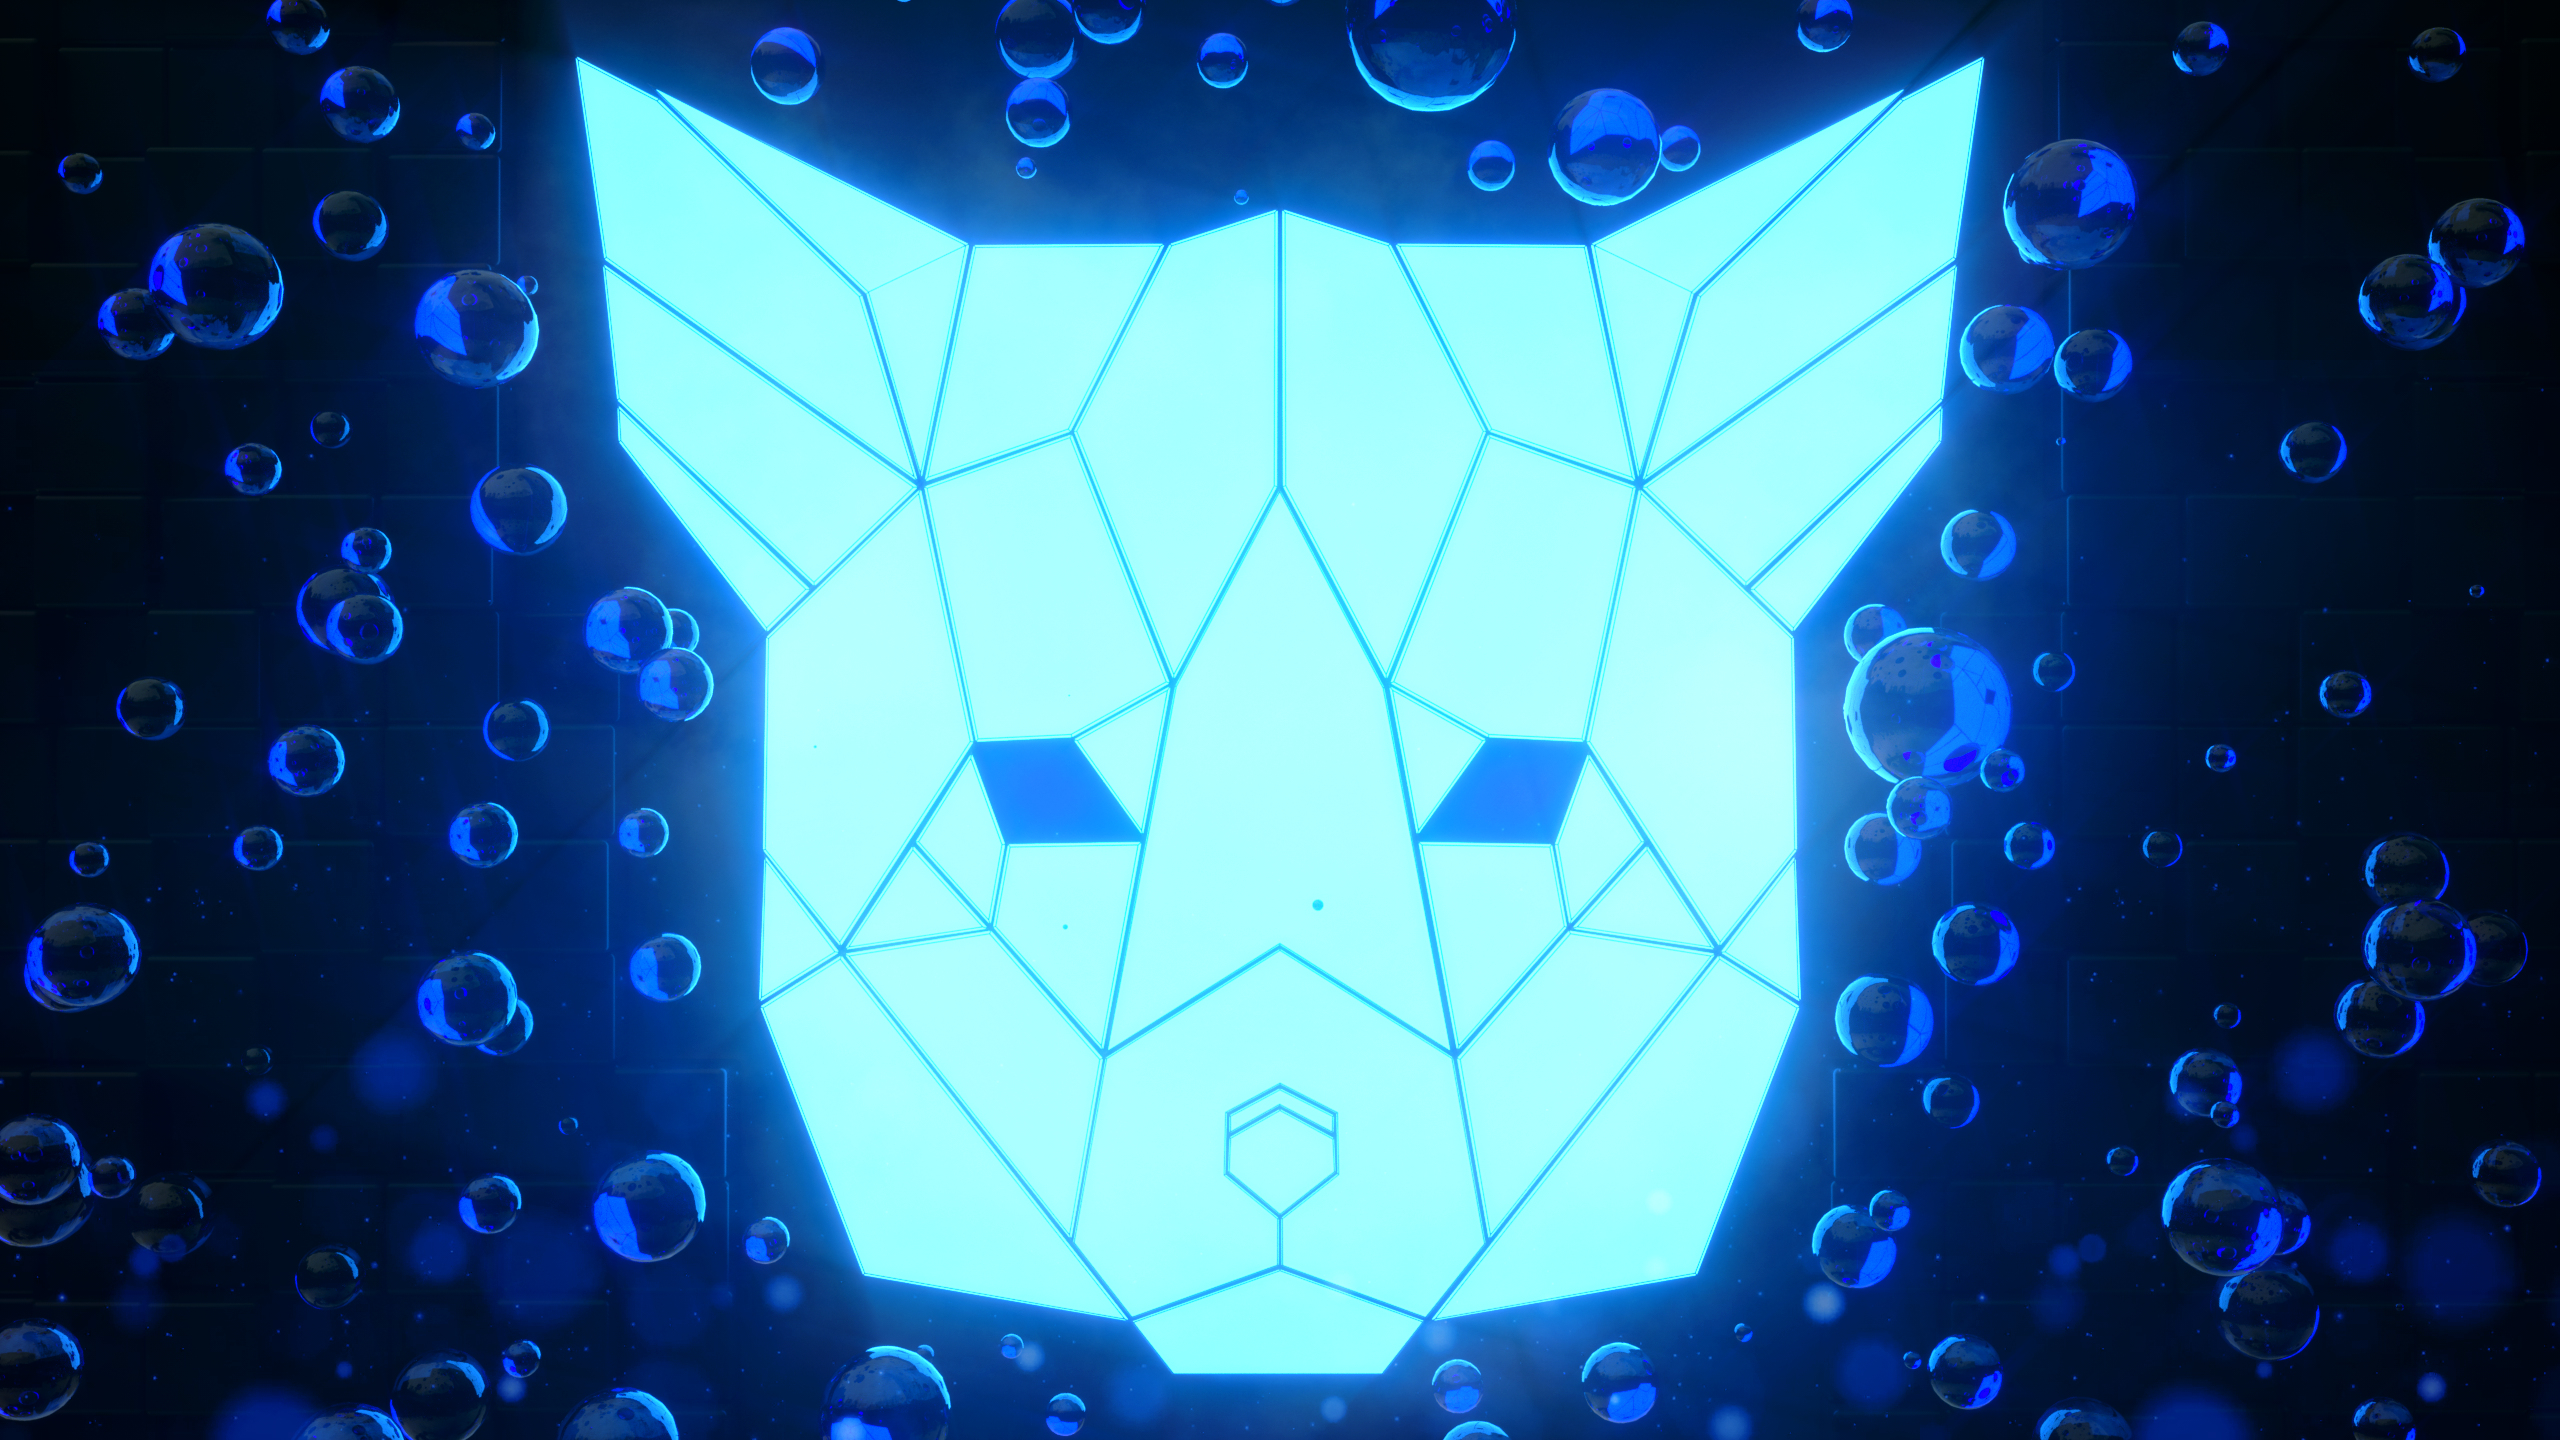 General 2560x1440 abstract 3D Abstract shining bright glowing bubbles polygon art low poly floating particles fox line art cyan blue digital art